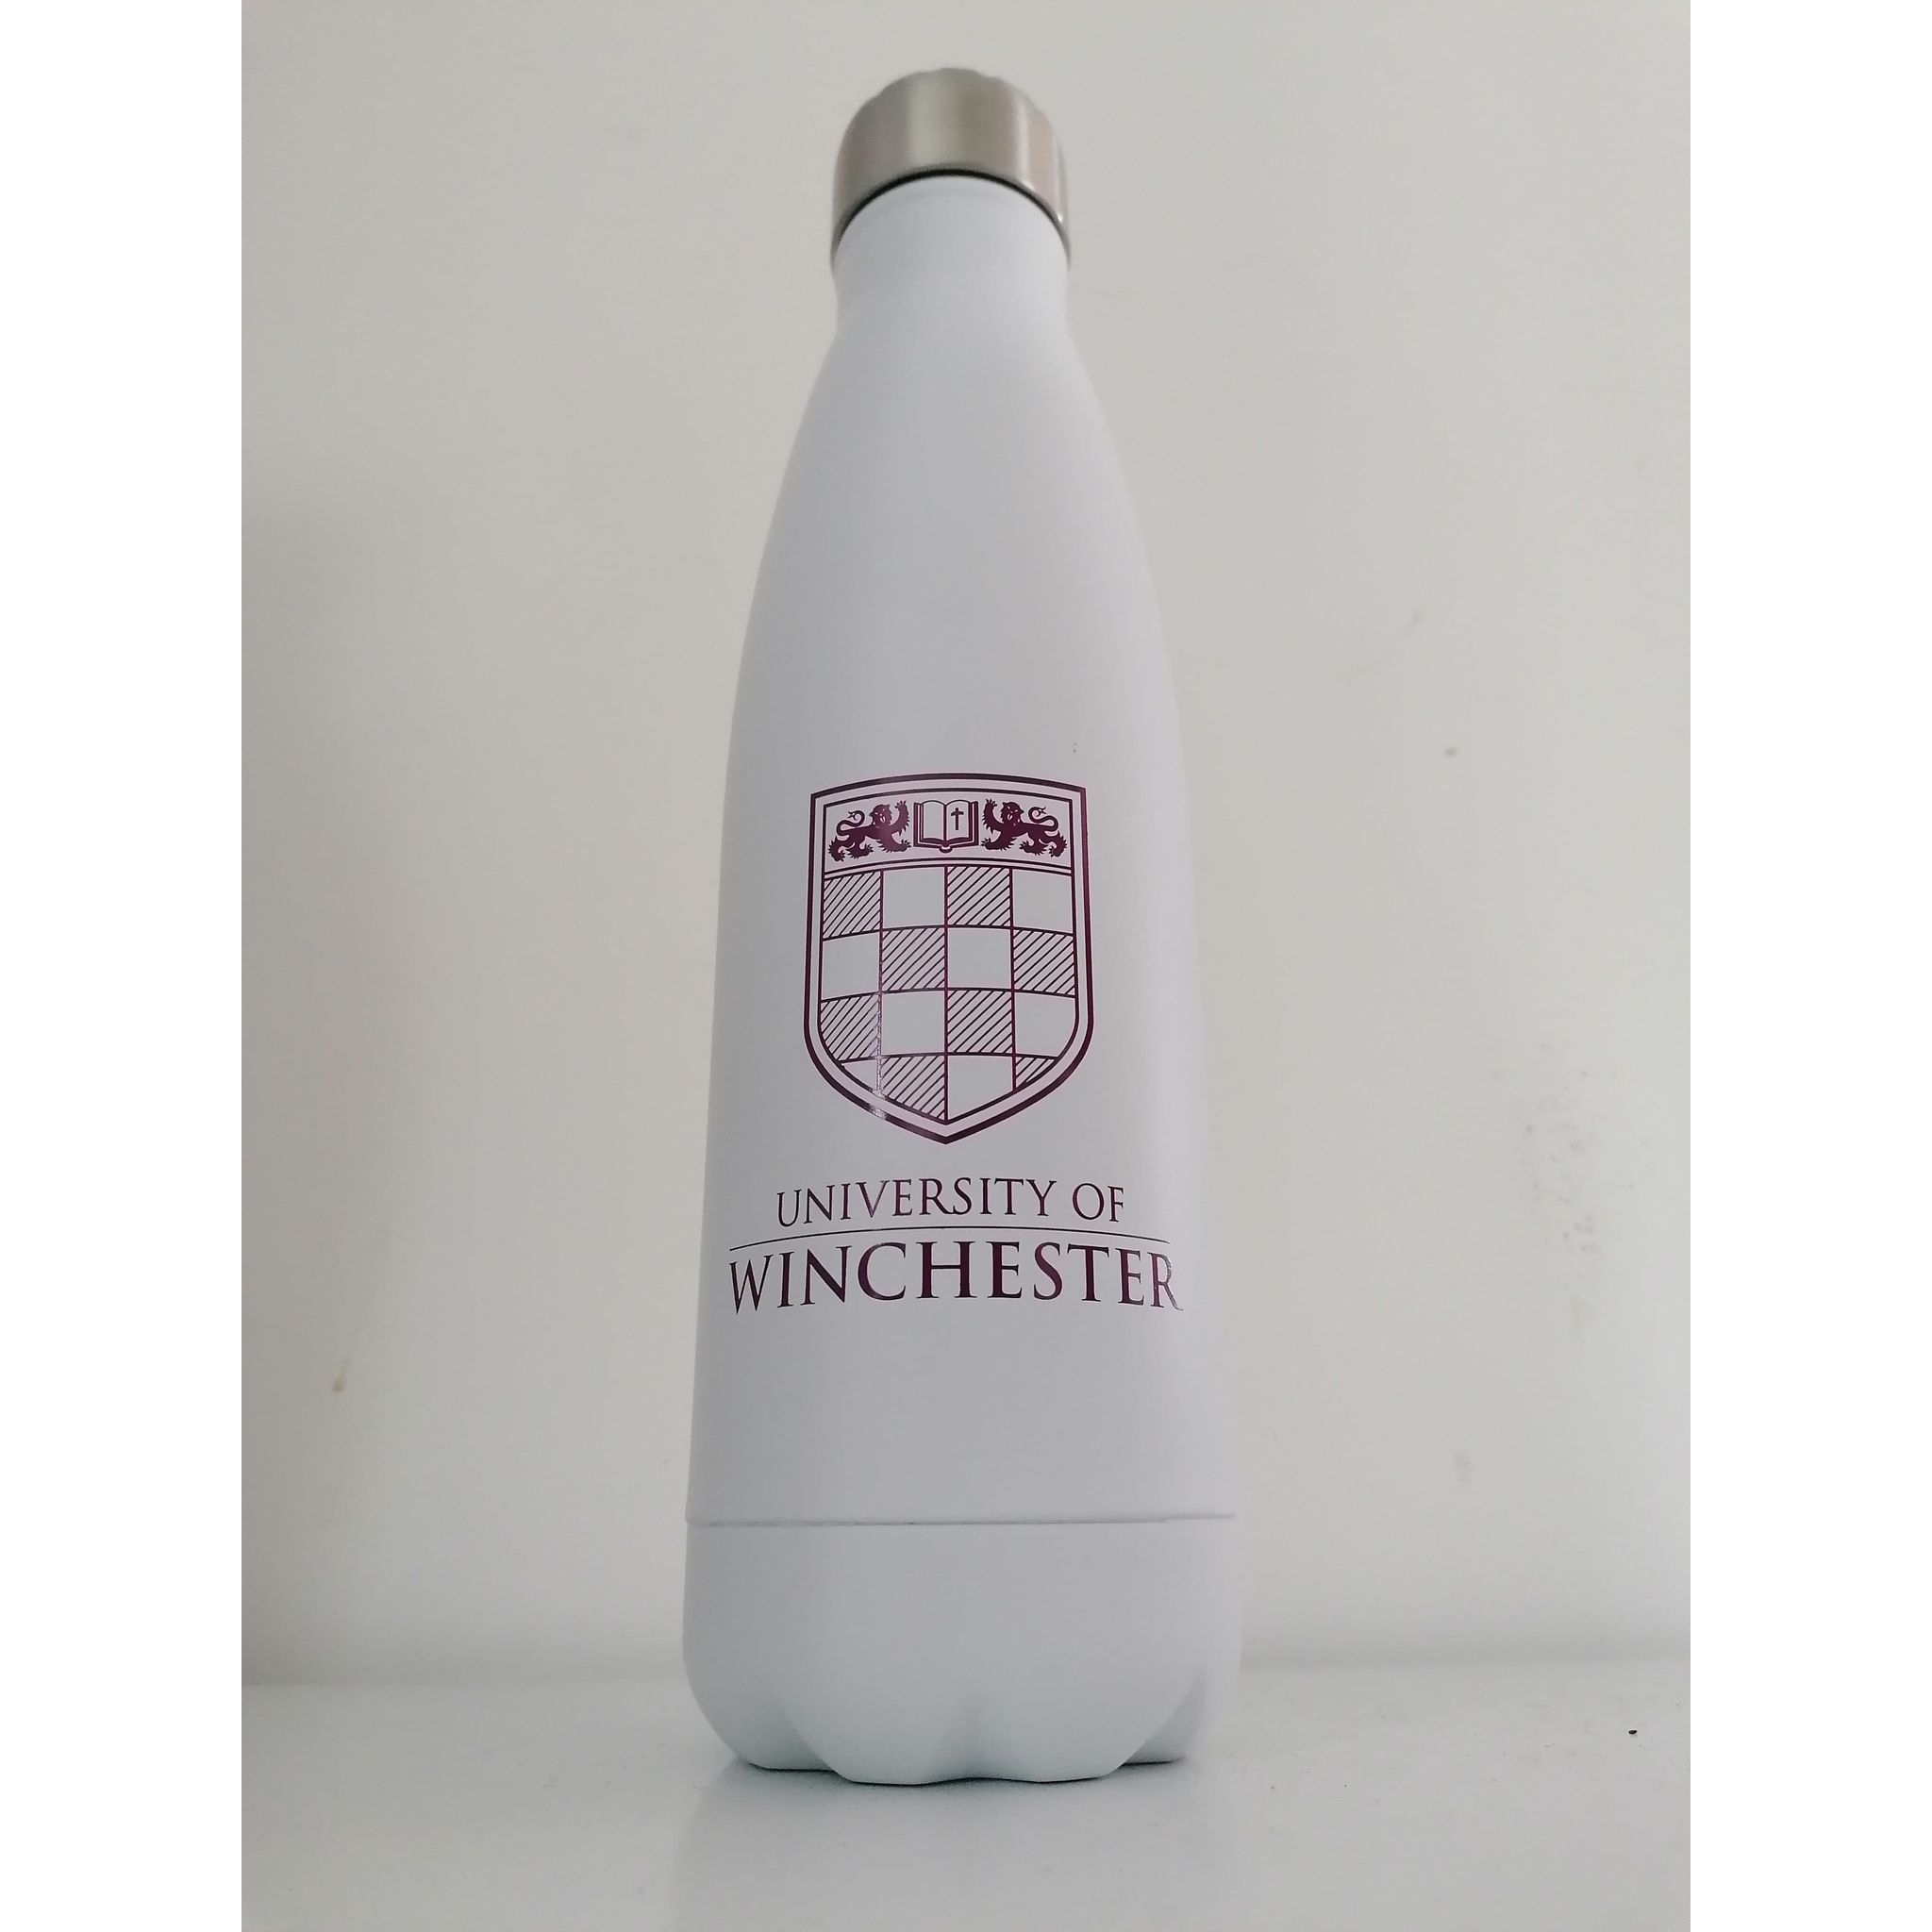 Branded insulated stainless steel bottle